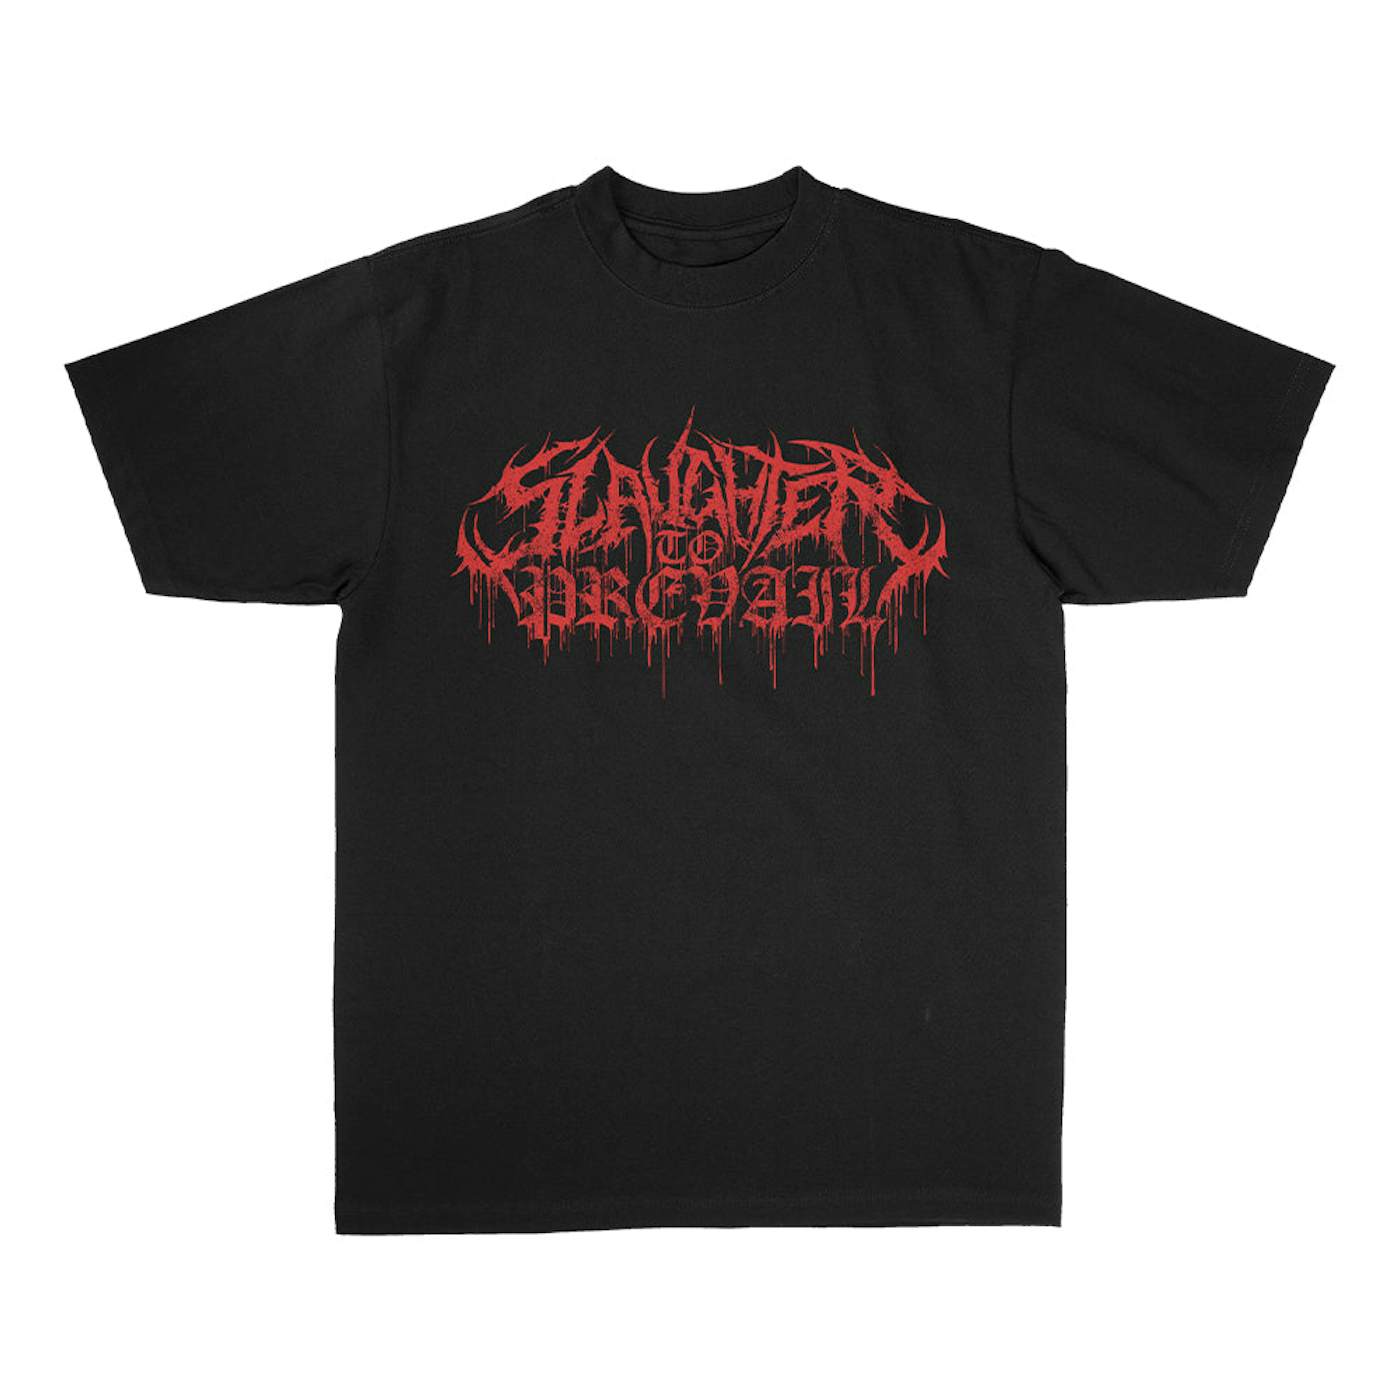 Slaughter To Prevail - "Bloodshed" Black Tee